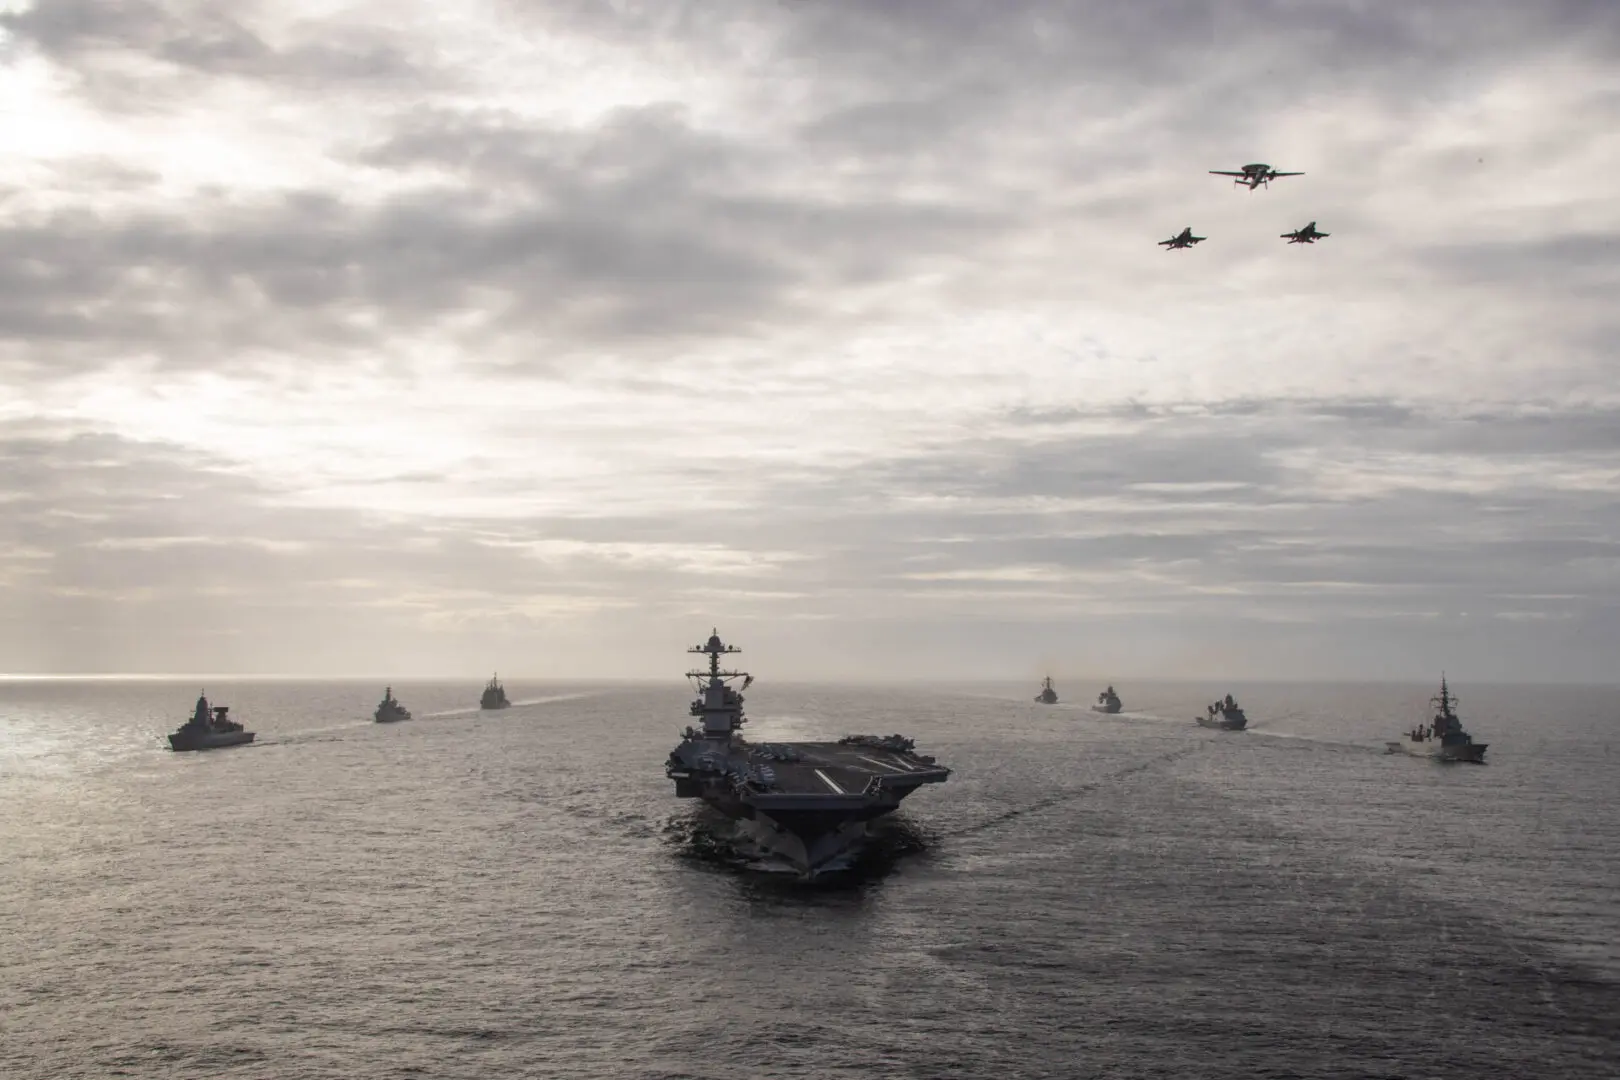 ATLANTIC OCEAN (Oct. 25, 2022) Aircraft attached to Carrier Air Wing (CVW) 8 fly over the first-in-class aircraft carrier USS Gerald R. Ford (CVN 78) as the ship steams in formation in the Atlantic Ocean with the Spanish Armada frigate çlvaro de Bazn (F 101), Danish navy frigate HDMS Peter Willemoes (F362), Dutch navy frigate HNLMS De Zeven Provincien (F 802), the U.S. Navy Arleigh Burke-class guided-missile destroyer USS Ramage (DDG 61), German navy frigate FGS Hessen (F 221), Dutch navy frigate HNLMS Van Amstel (F 831), and the U.S. Navy Ticonderoga-class guided-missile cruiser USS Normandy (CG 60), Oct. 25, 2022. The Gerald R. Ford Carrier Strike Group (GRFCSG) is deployed in the Atlantic Ocean, conducting training and operations alongside NATO Allies and partners to enhance integration for future operations and demonstrate the U.S. NavyÕs commitment to a peaceful, stable and conflict-free Atlantic region. (U.S. Navy photo by Mass Communication Specialist 2nd Class Jackson Adkins)